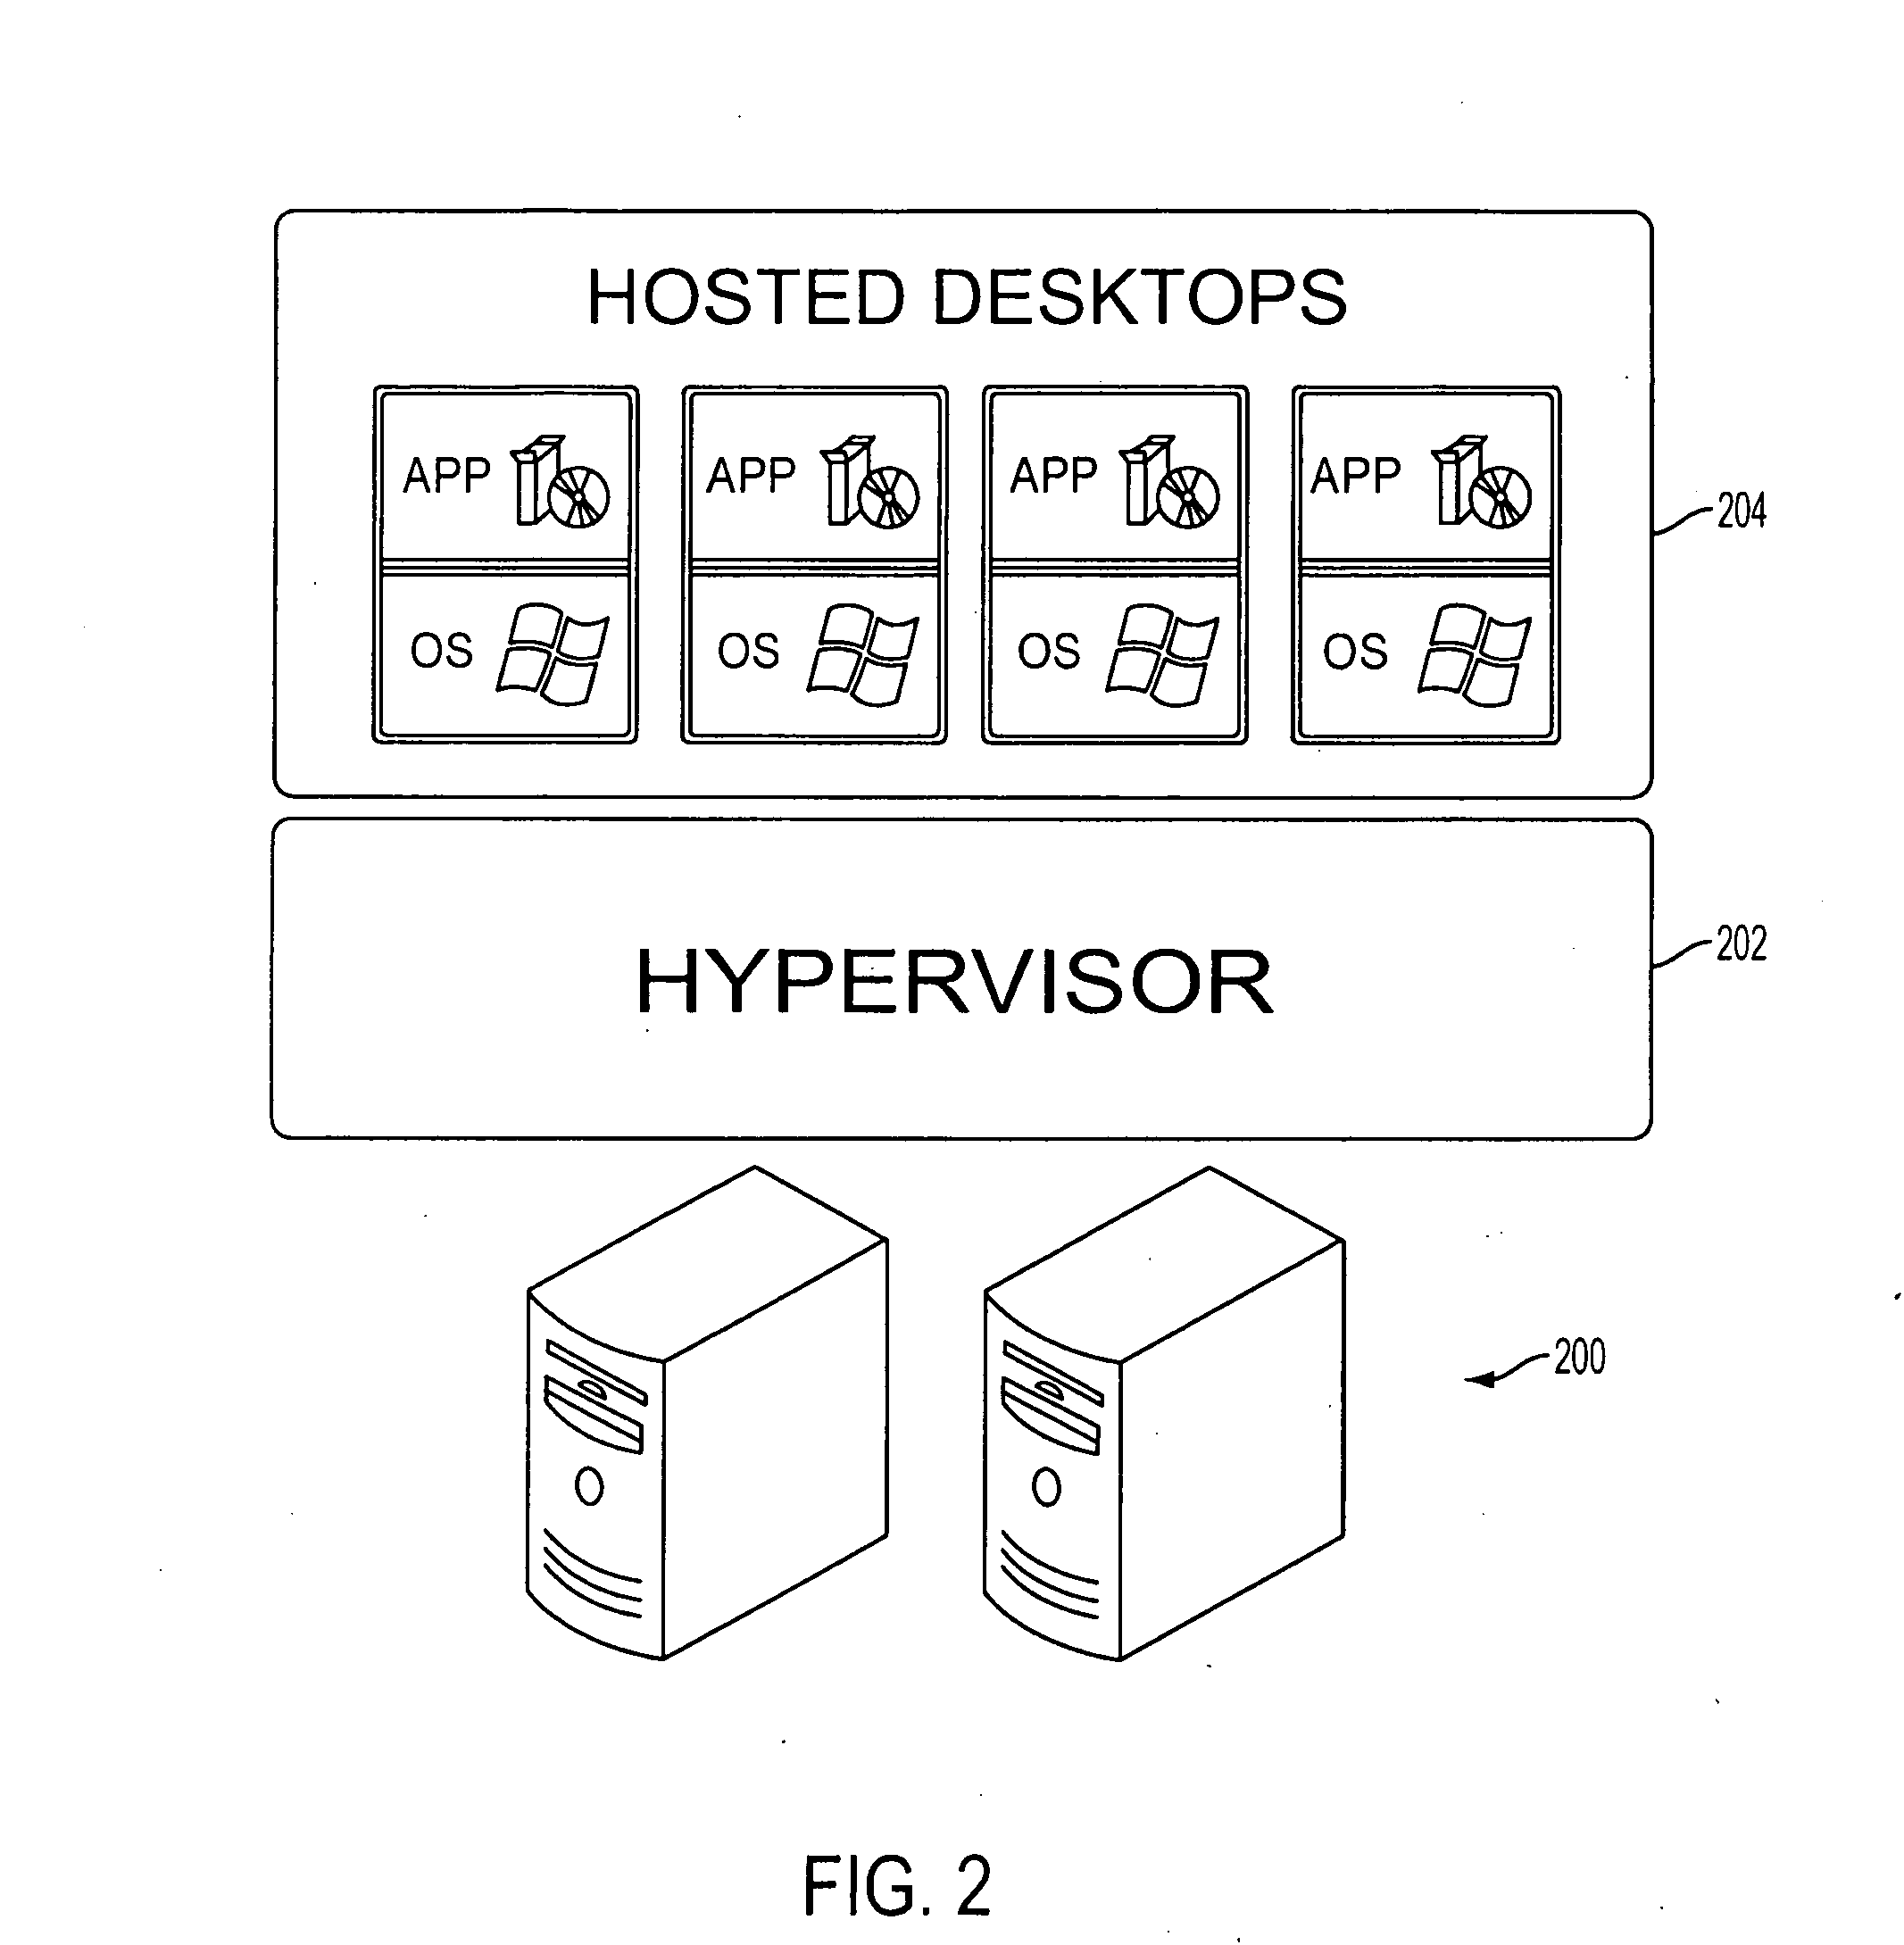 System for provisioning, allocating, and managing virtual and physical desktop computers in a network computing environment